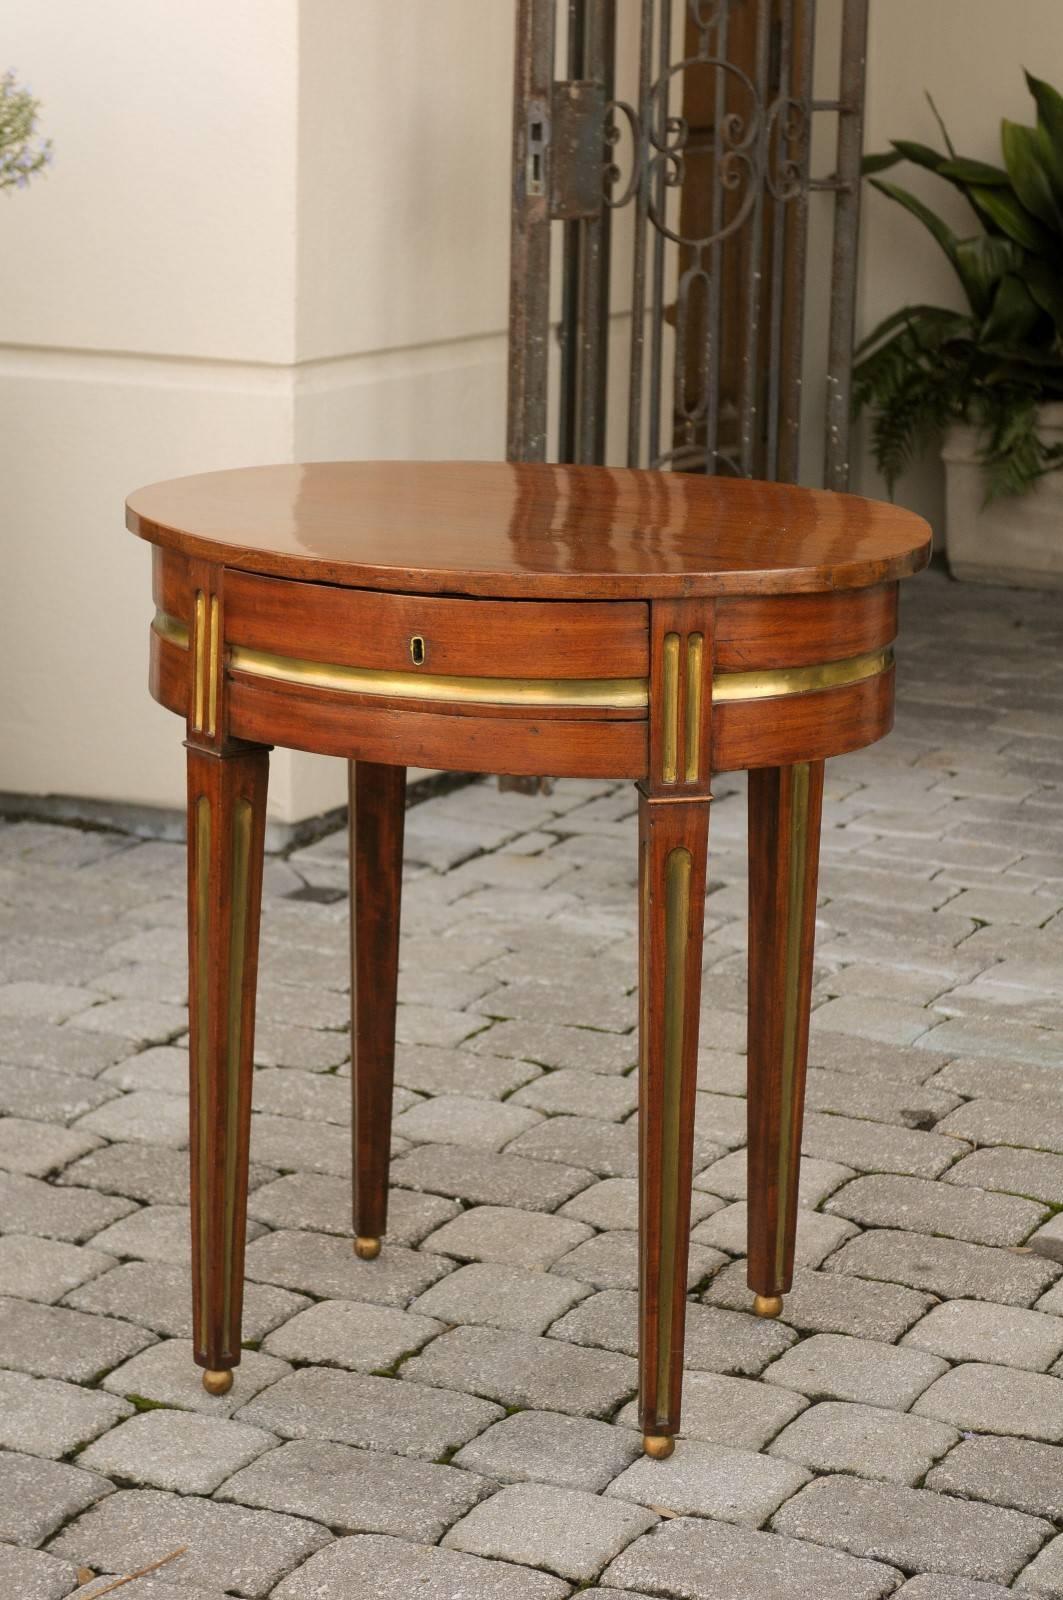 19th century Russian mahogany oval side table with vertical and horizontal brass inlaid elements.  This mahogany side table features an oval top over a frieze drawer resting on four tapered fluted legs with brass inlays and brass ball feet. A thick